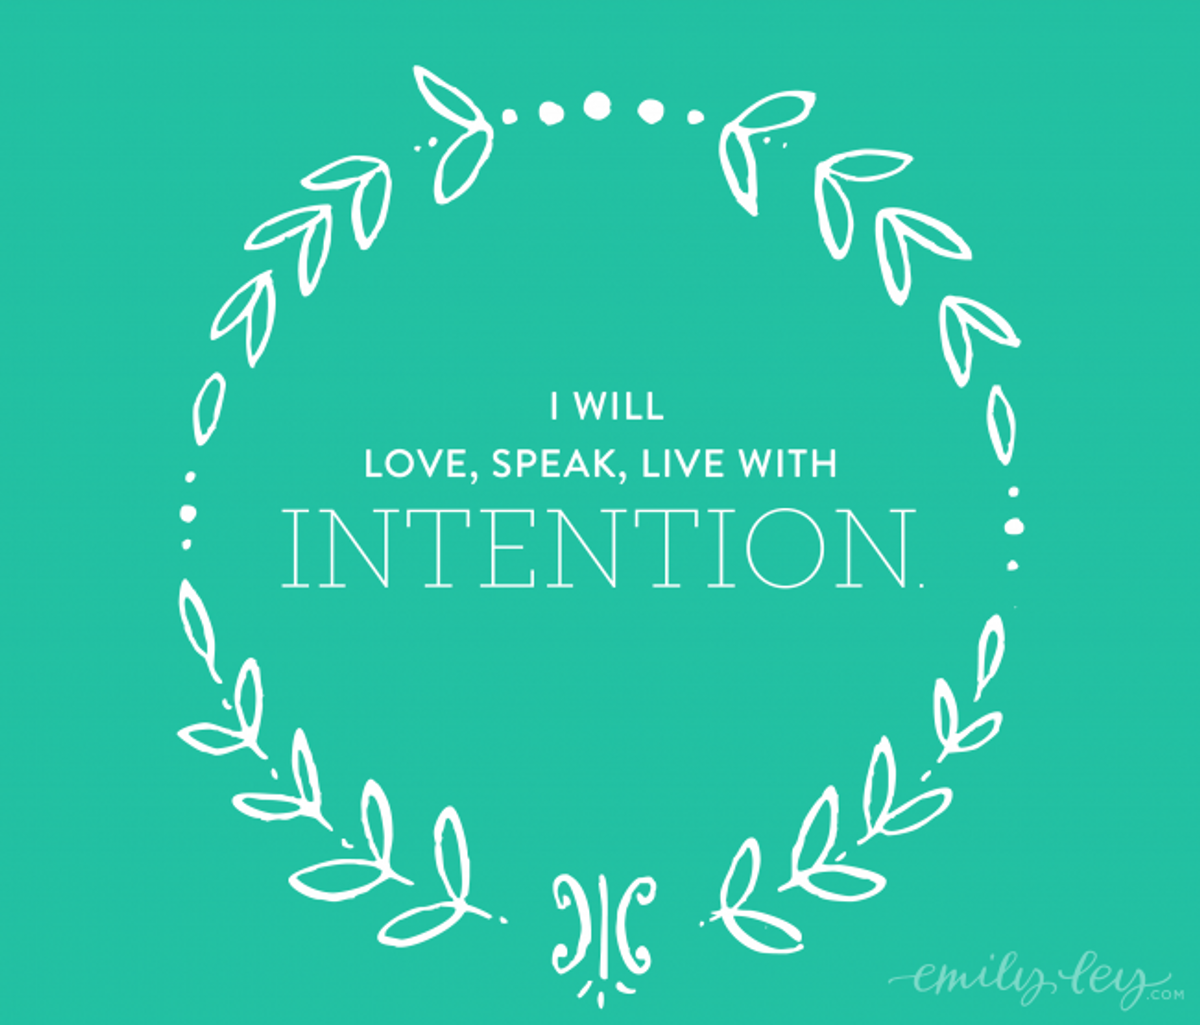 Live with Intention At 21 And For All Of Your Days